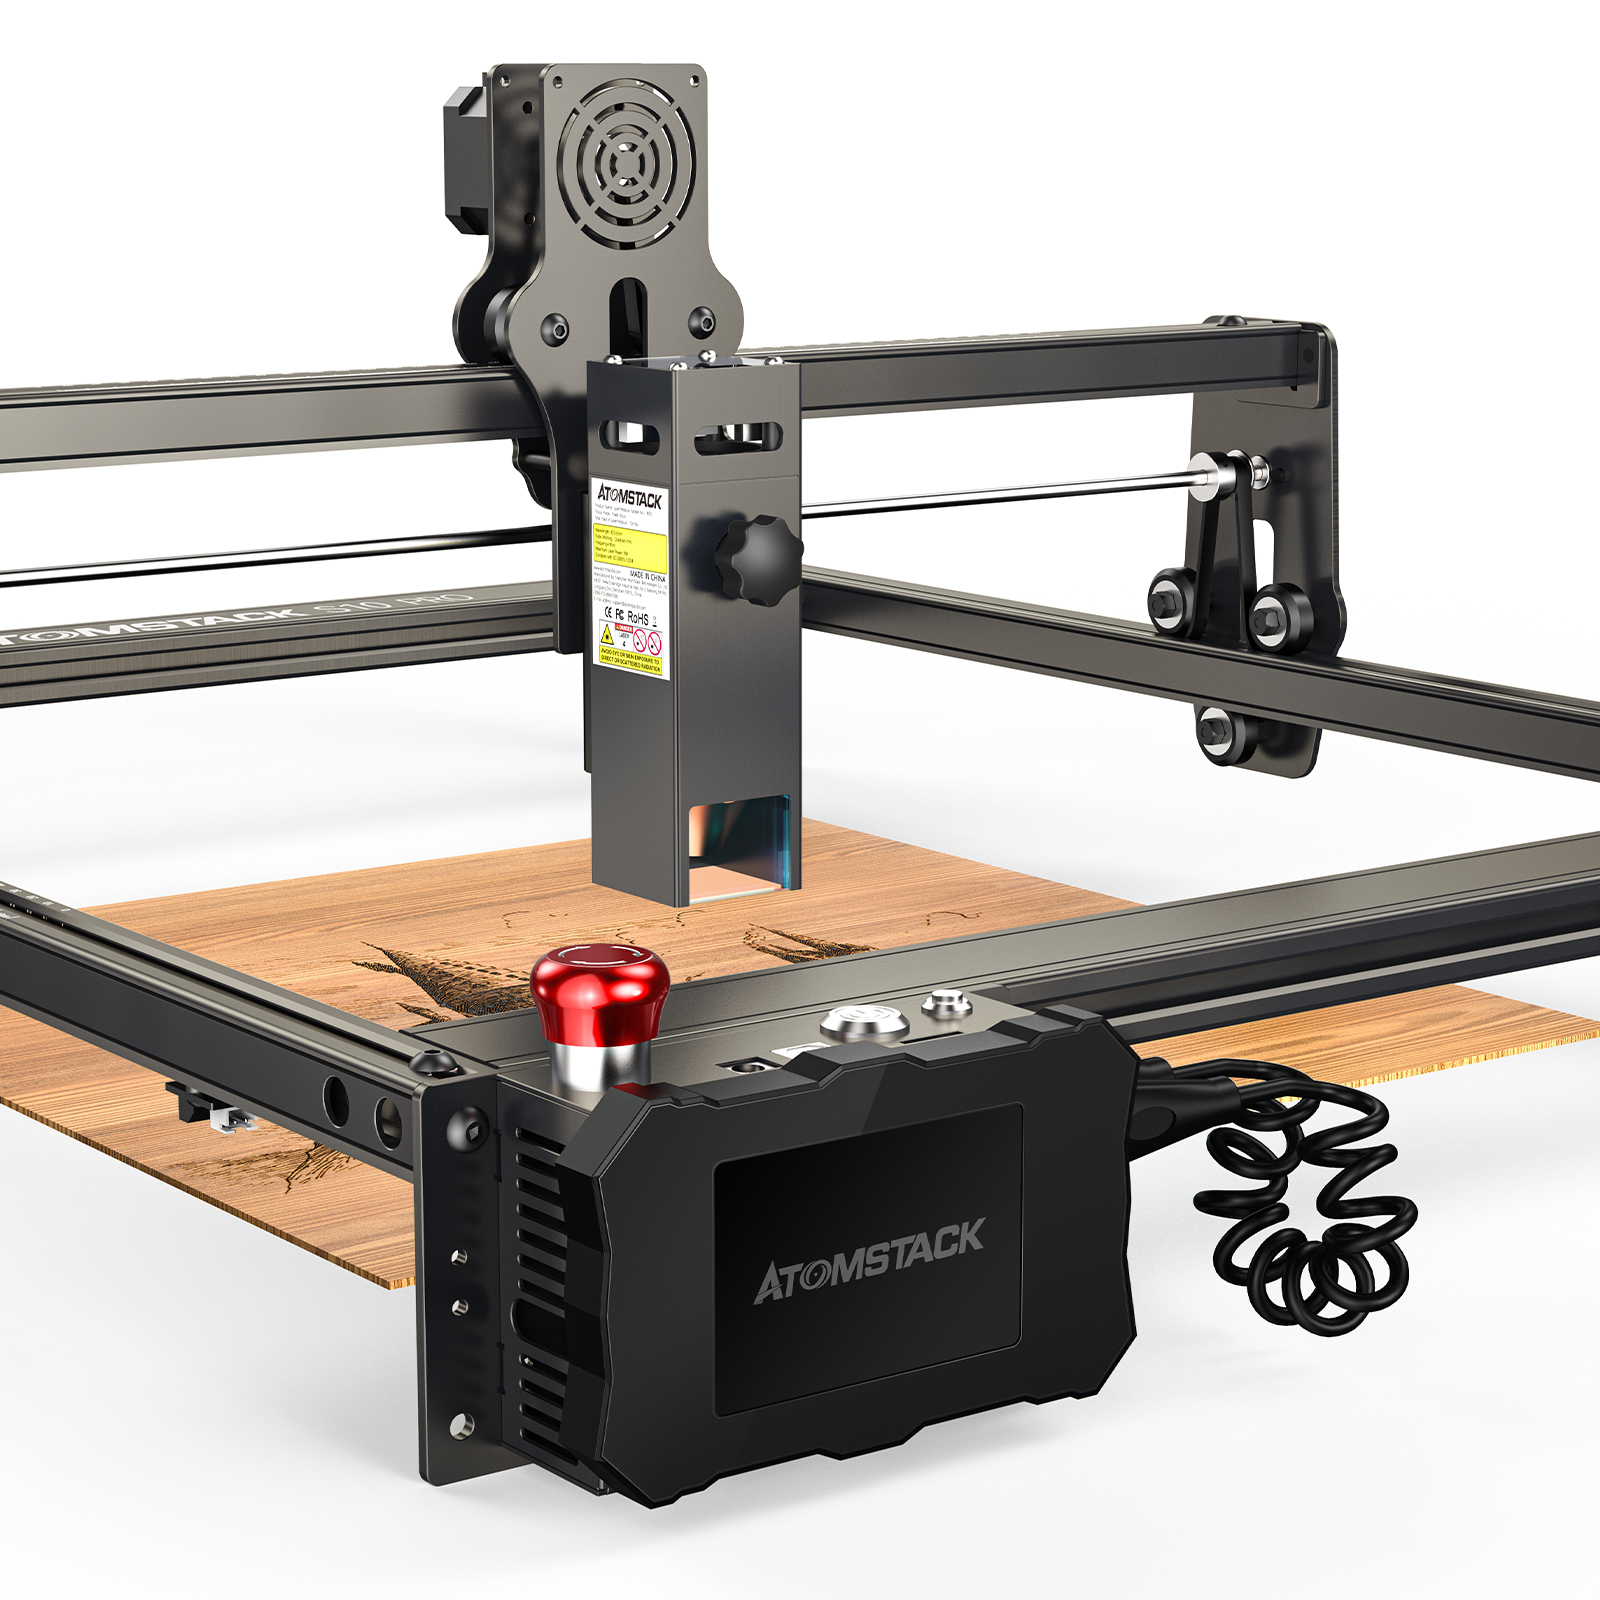 Find [EU Direct] ATOMSTACK S10 PRO Flagship Dual-Laser Laser Engraving Cutting Machine Support Offline Engraving Laser Engraver Cutter 10W Output Power Fixed-Focus 304 Mirror Stainless Steel Engraving Metal Wood Leather Acrylic DIY Engraver for Sale on Gipsybee.com with cryptocurrencies